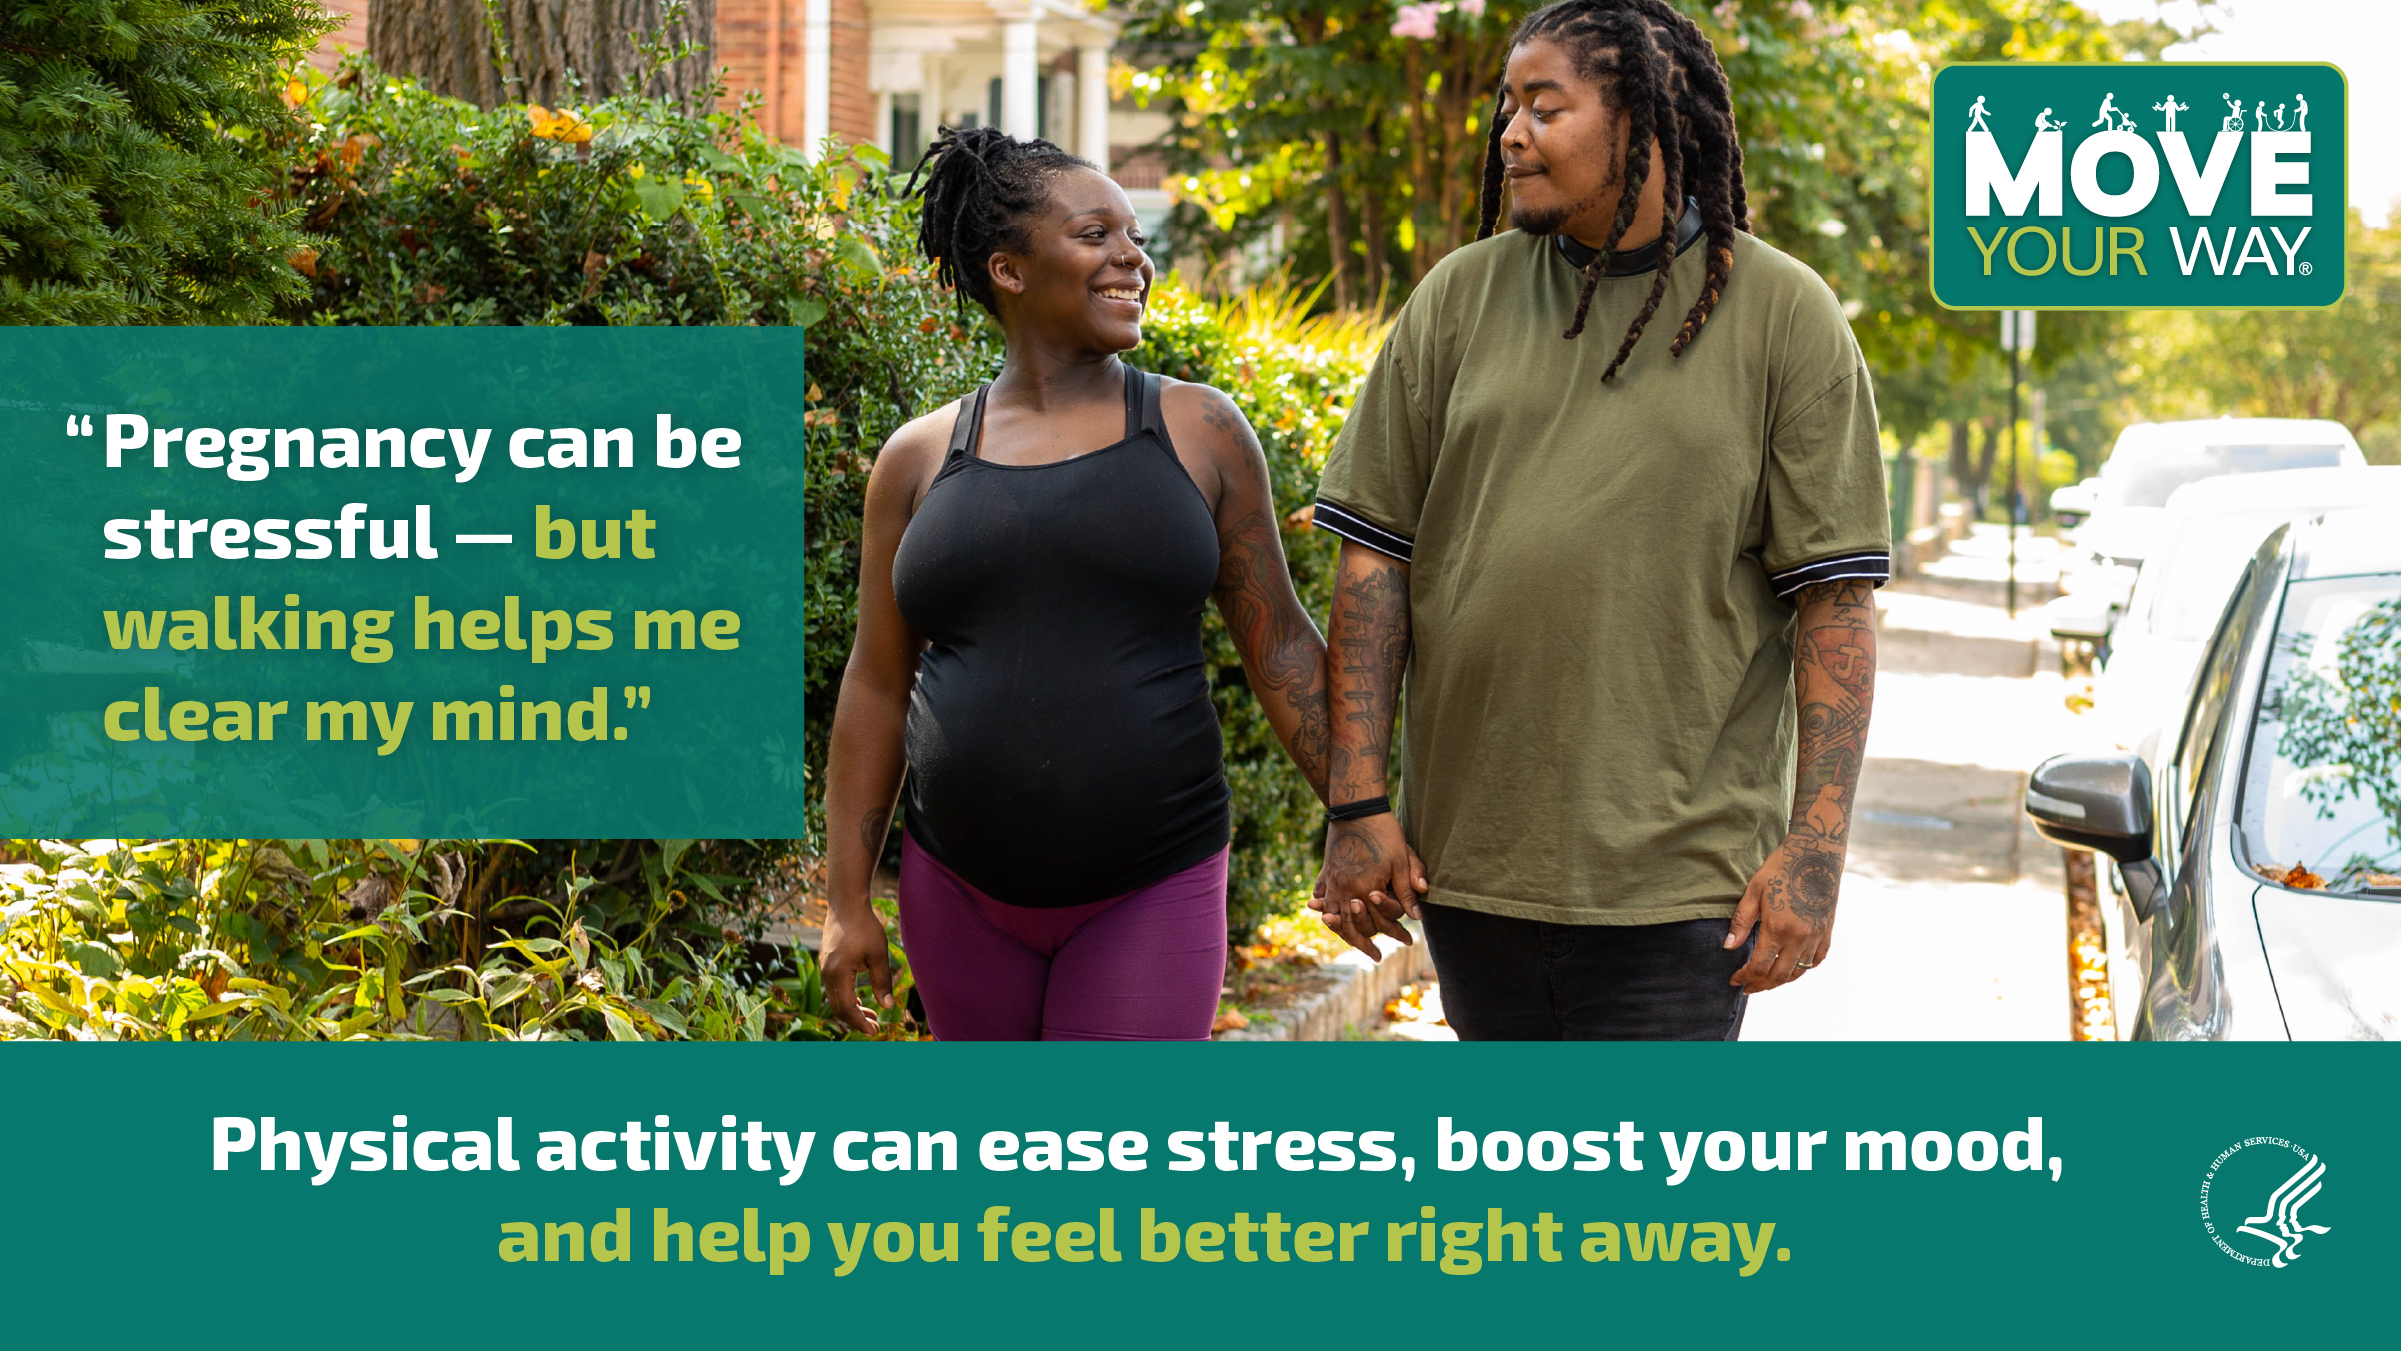 A young Black couple is holding hands and walking down the street. The woman is visibly pregnant. They’re looking at each other and smiling. The image also shows the Move Your Way logo and the following messages: "Pregnancy can be stressful — but walking helps me clear my mind." and "Physical activity can ease stress, boost your mood, and help you feel better right away."